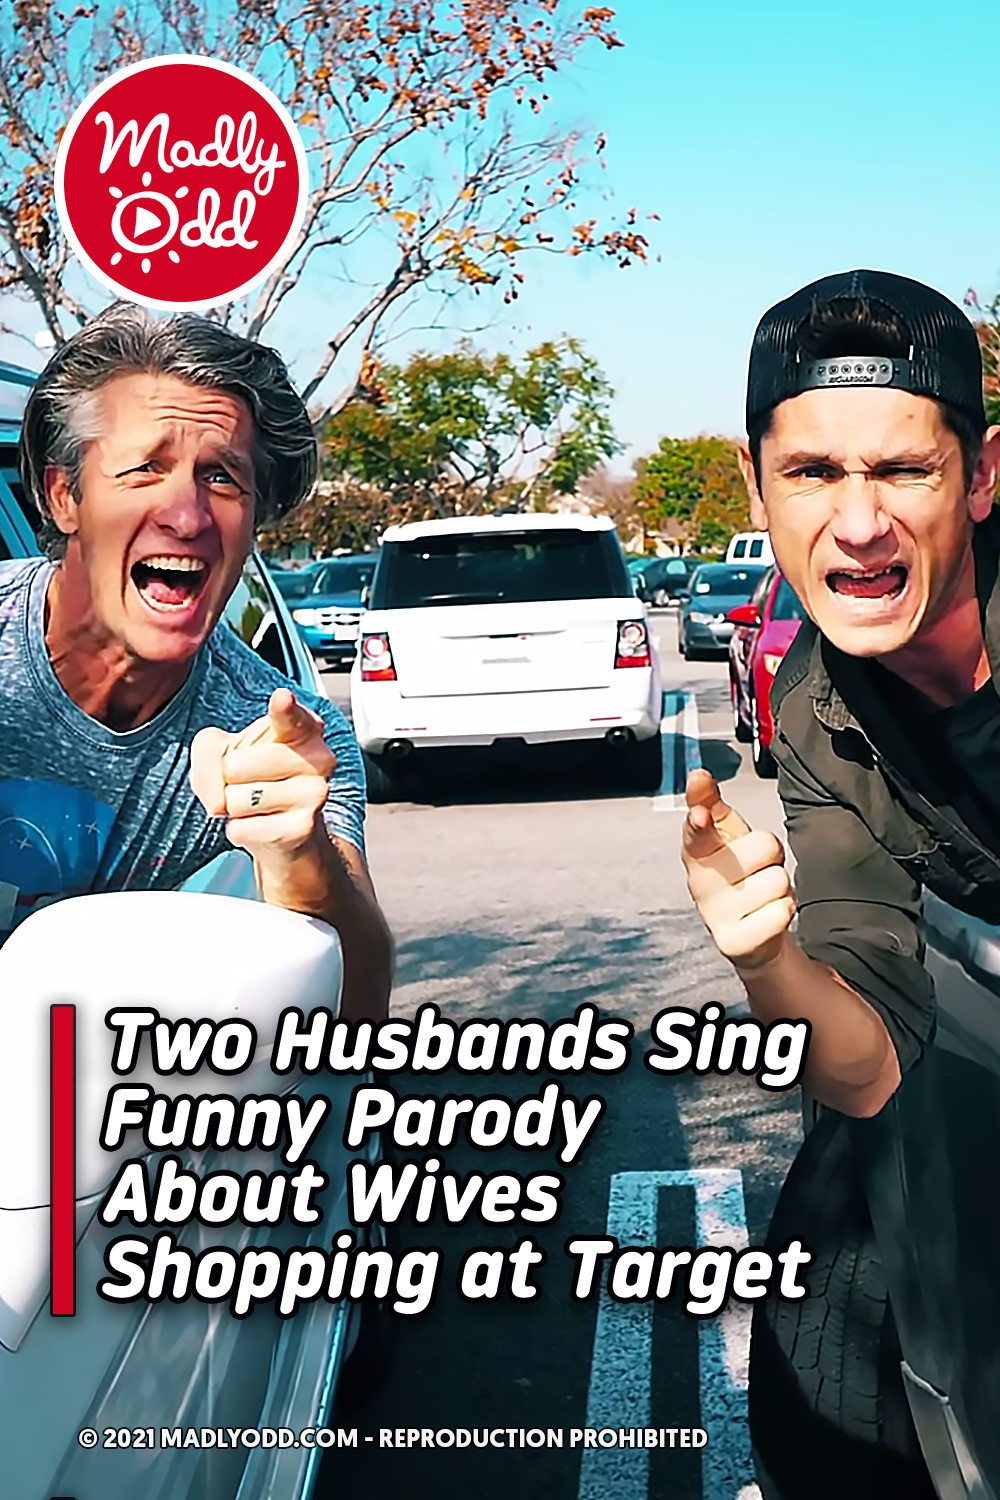 Two Husbands Sing Funny Parody About Wives Shopping at Target